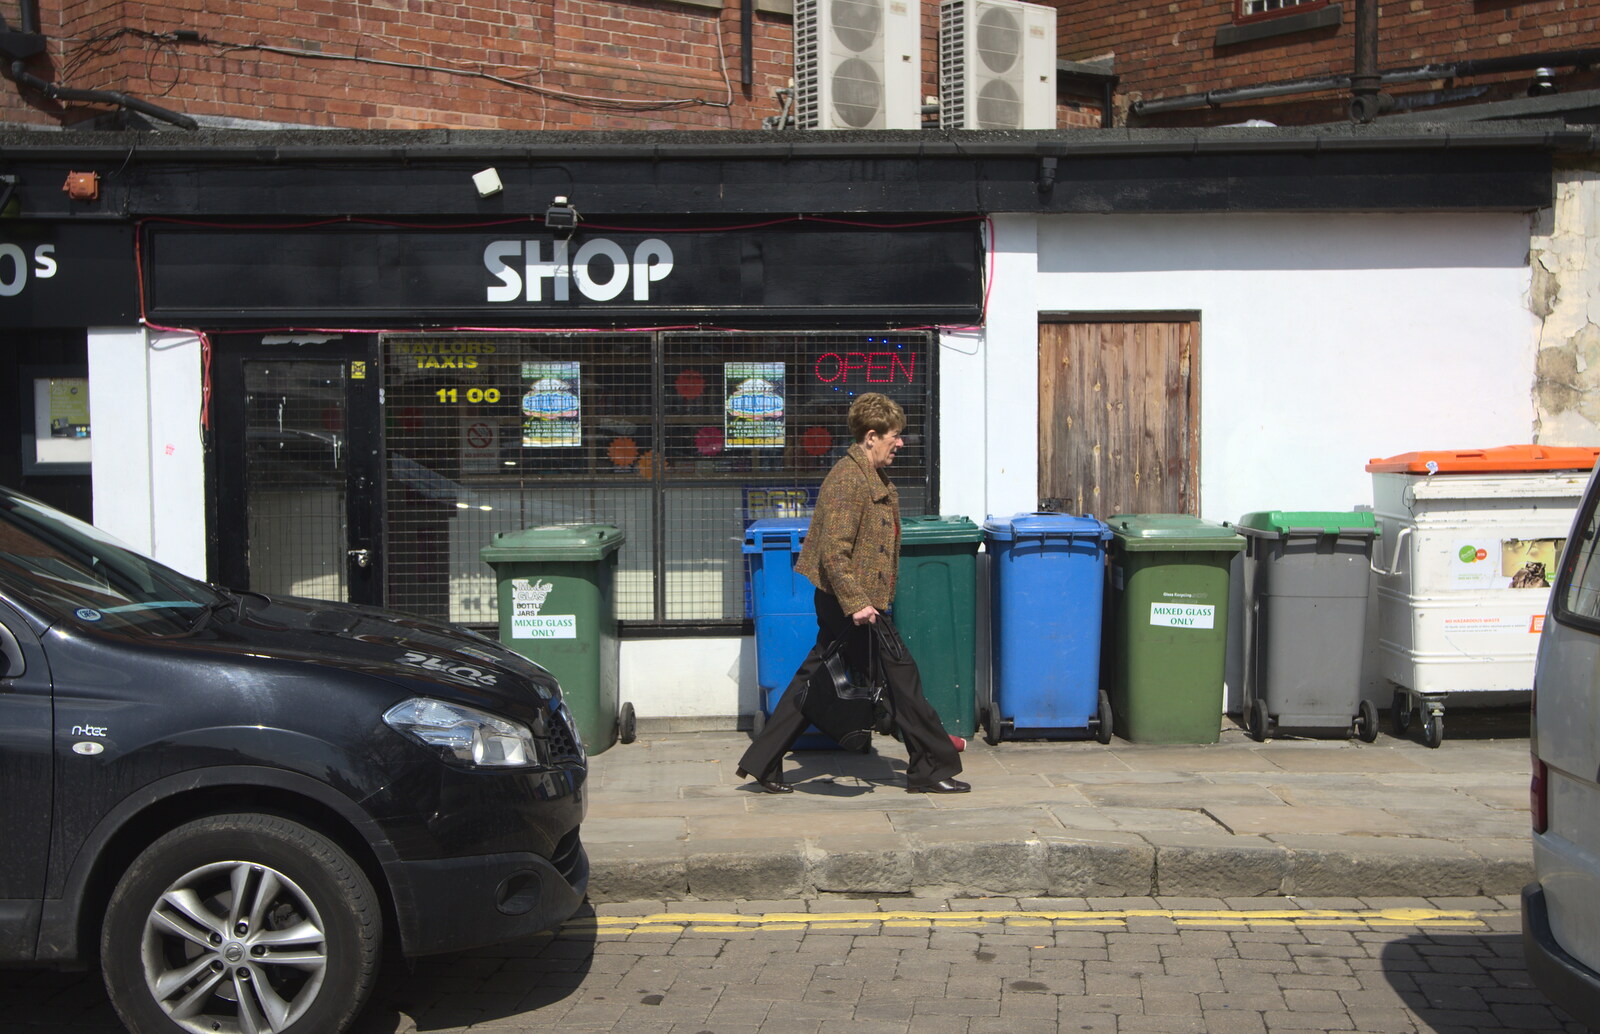 A shop in Chesterfield, prosaicly called 'Shop' from Chesterfield and the Twisty Spire, Derbyshire - 19th April 2013